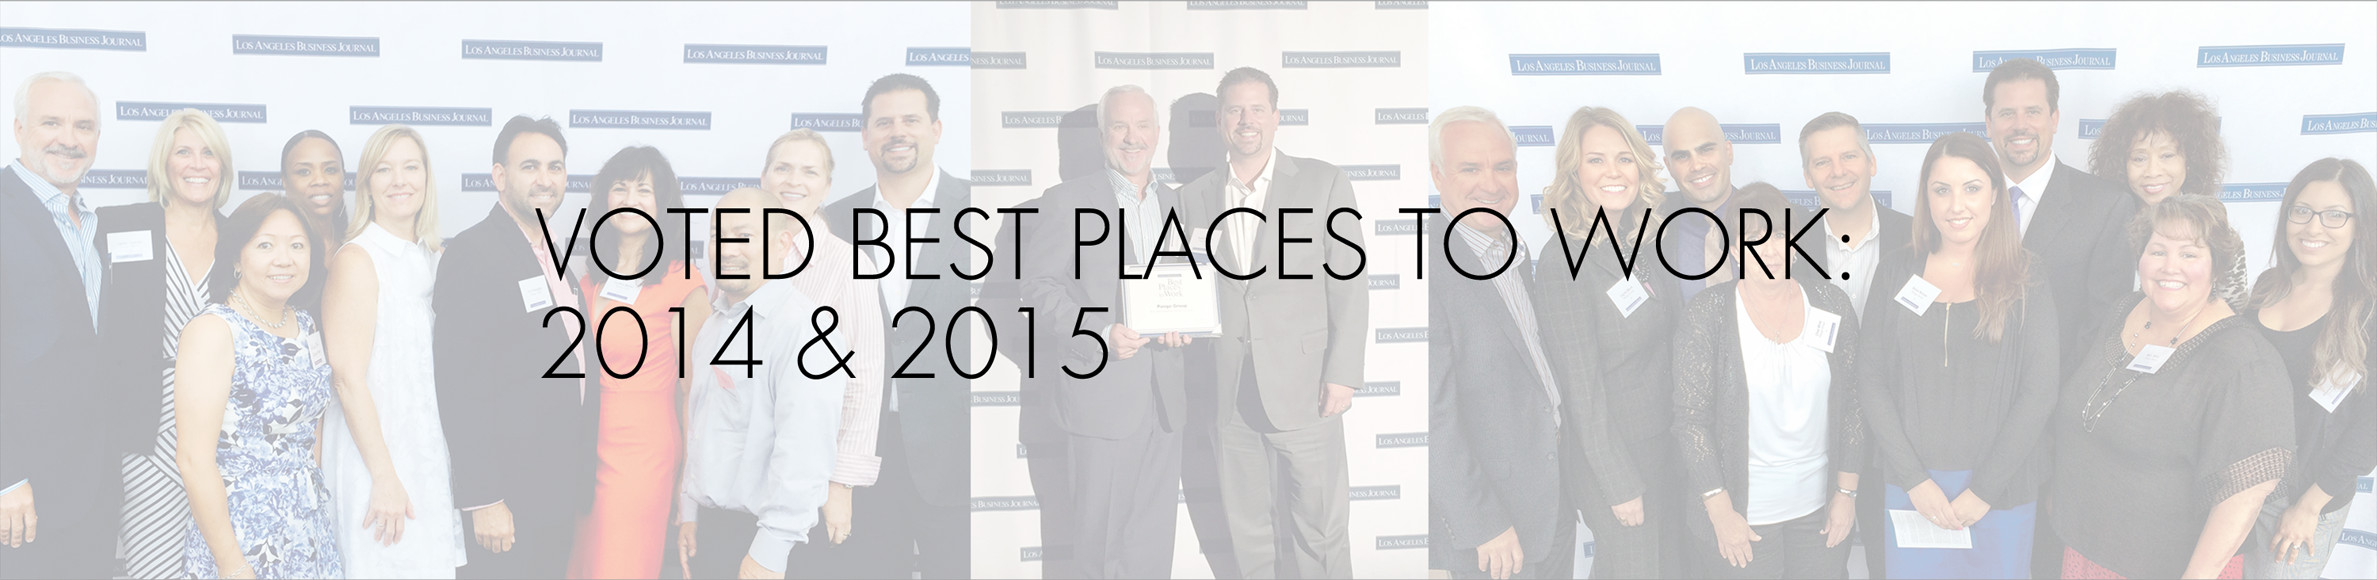 Glen Oaks Escrow Named Best Place to Work in Orange County and San Diego